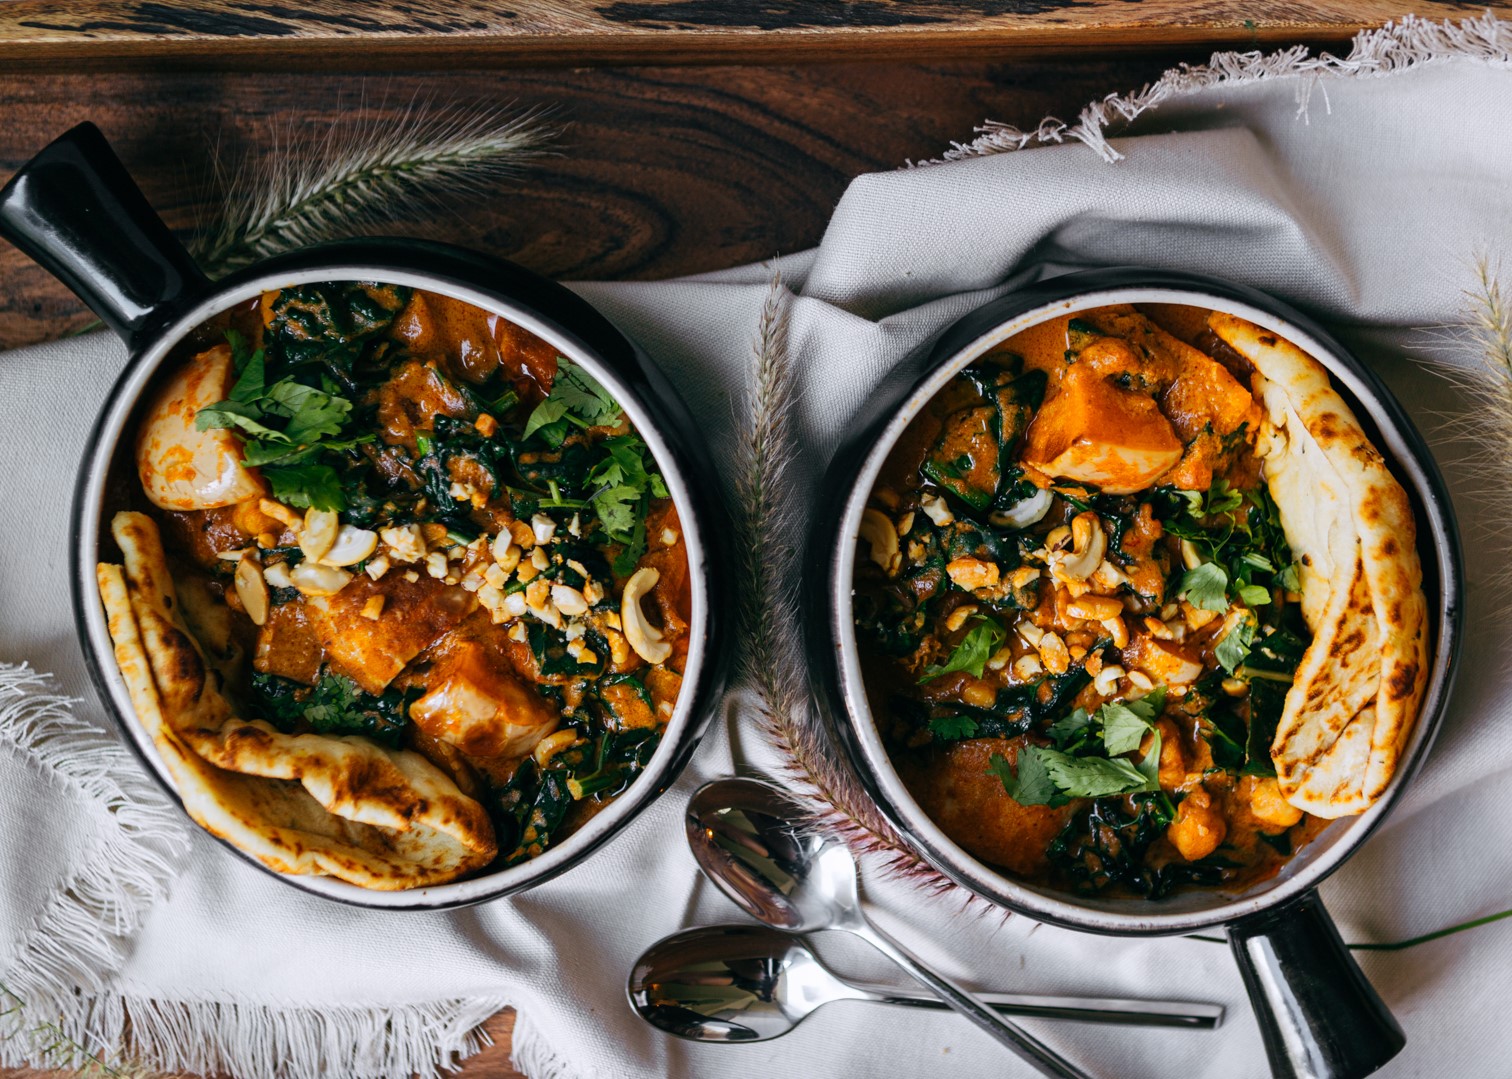 Peanut Stew with Squash, Chickpeas and Kale